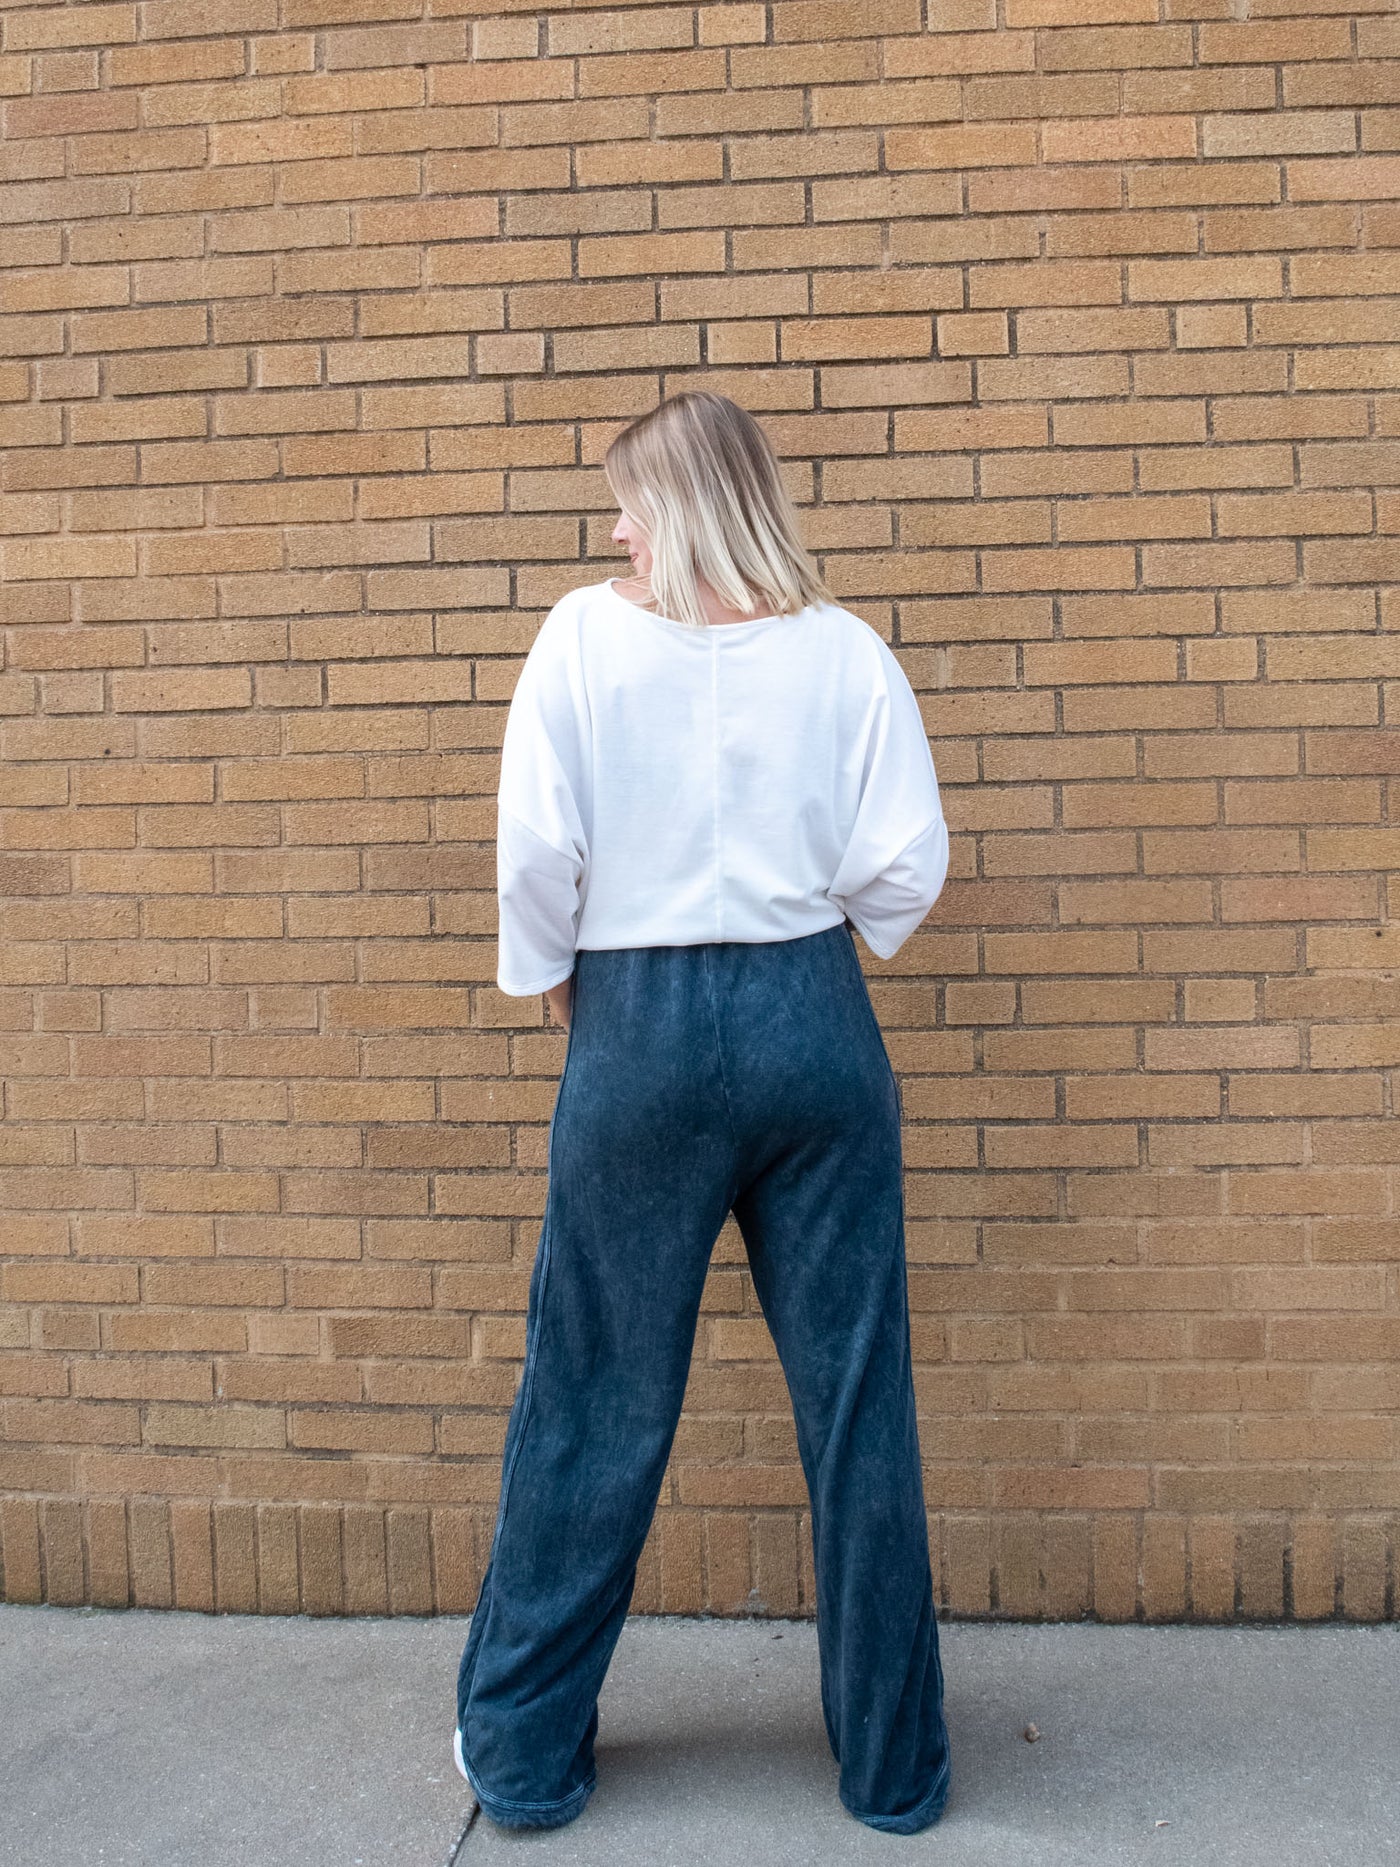 A model wearing a high waisted, drawstring navy sweatpants. She has them paired with a white top and white sneakers.